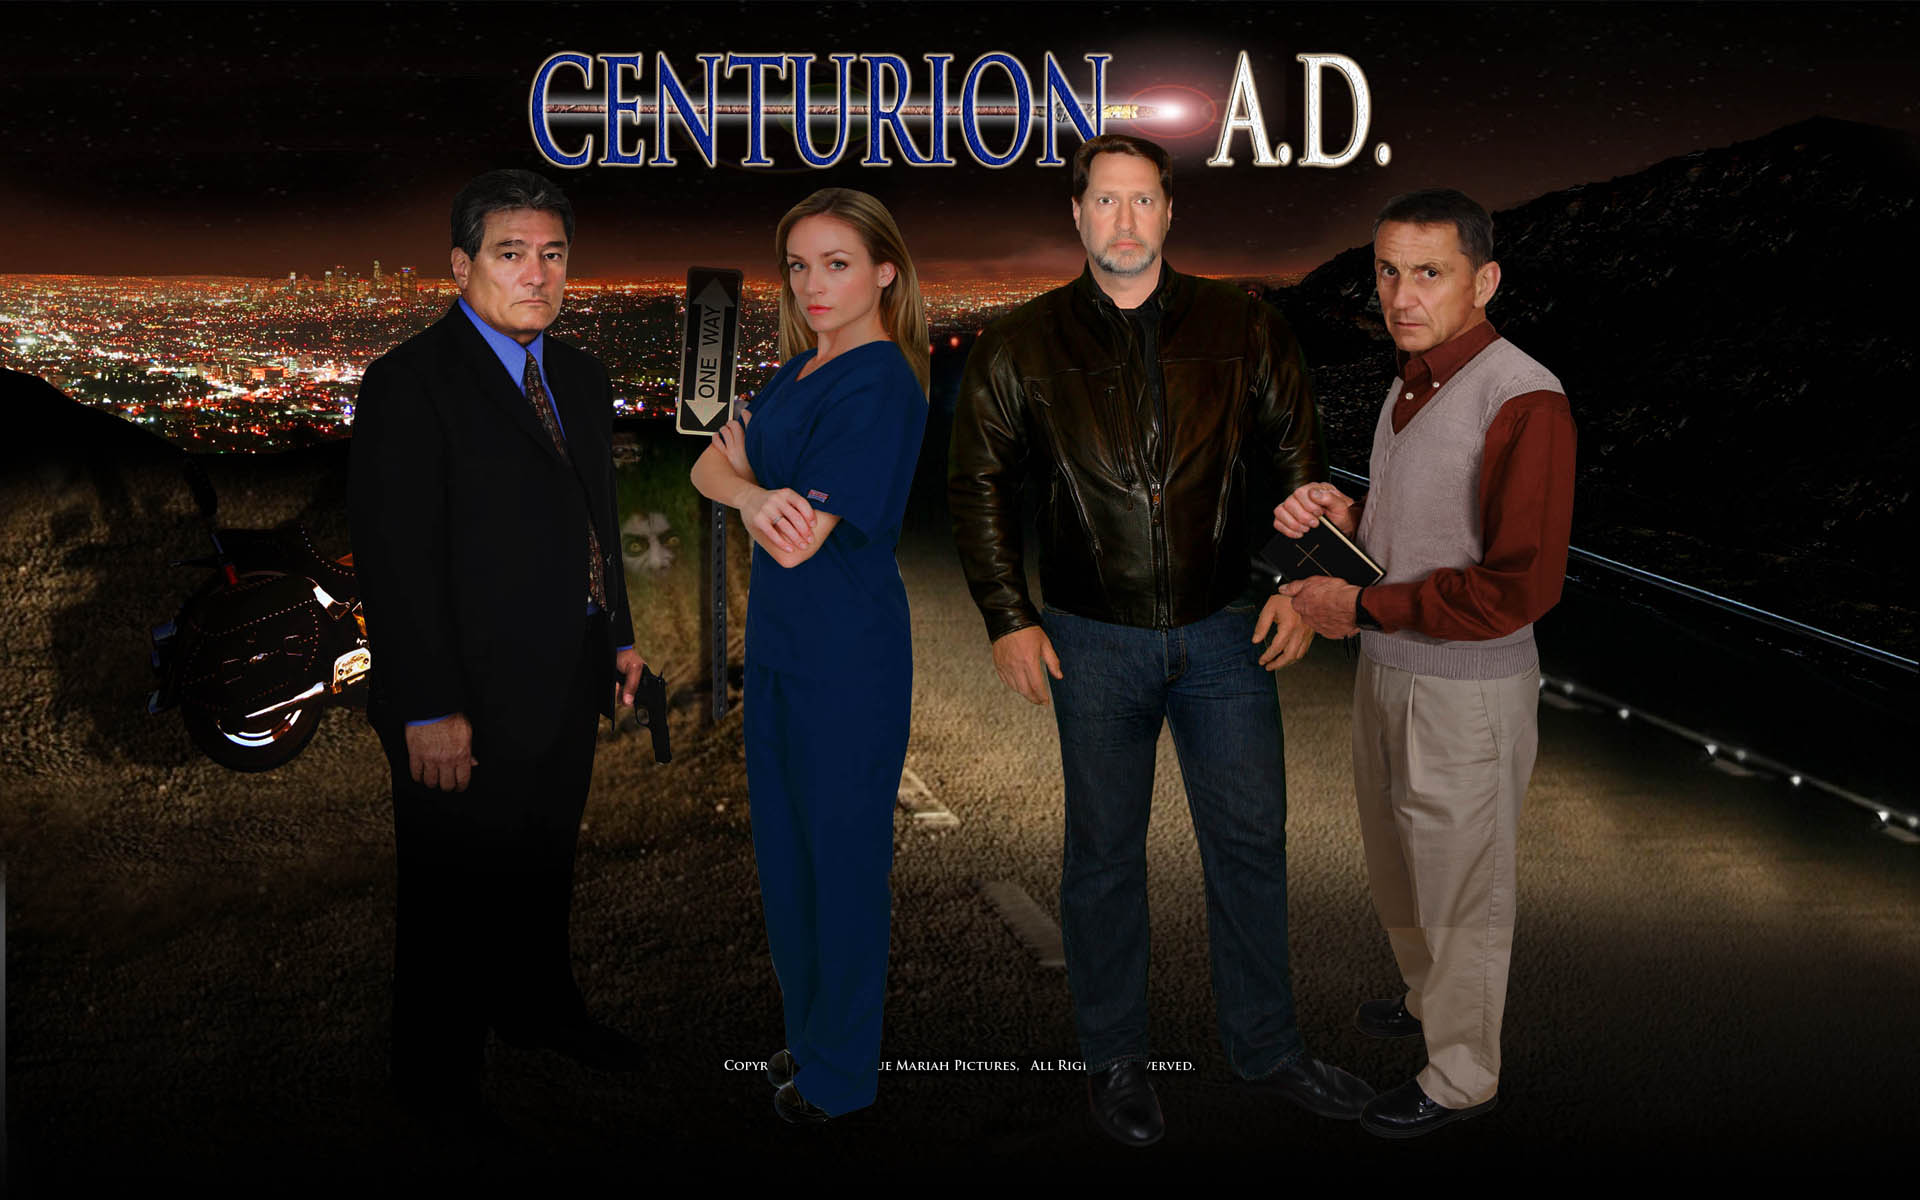 Vincent Inneo, Katherine Randolph, Brian Reed Garvin, and Martin Horsey in a poster set-up for the feature film Centurion AD.